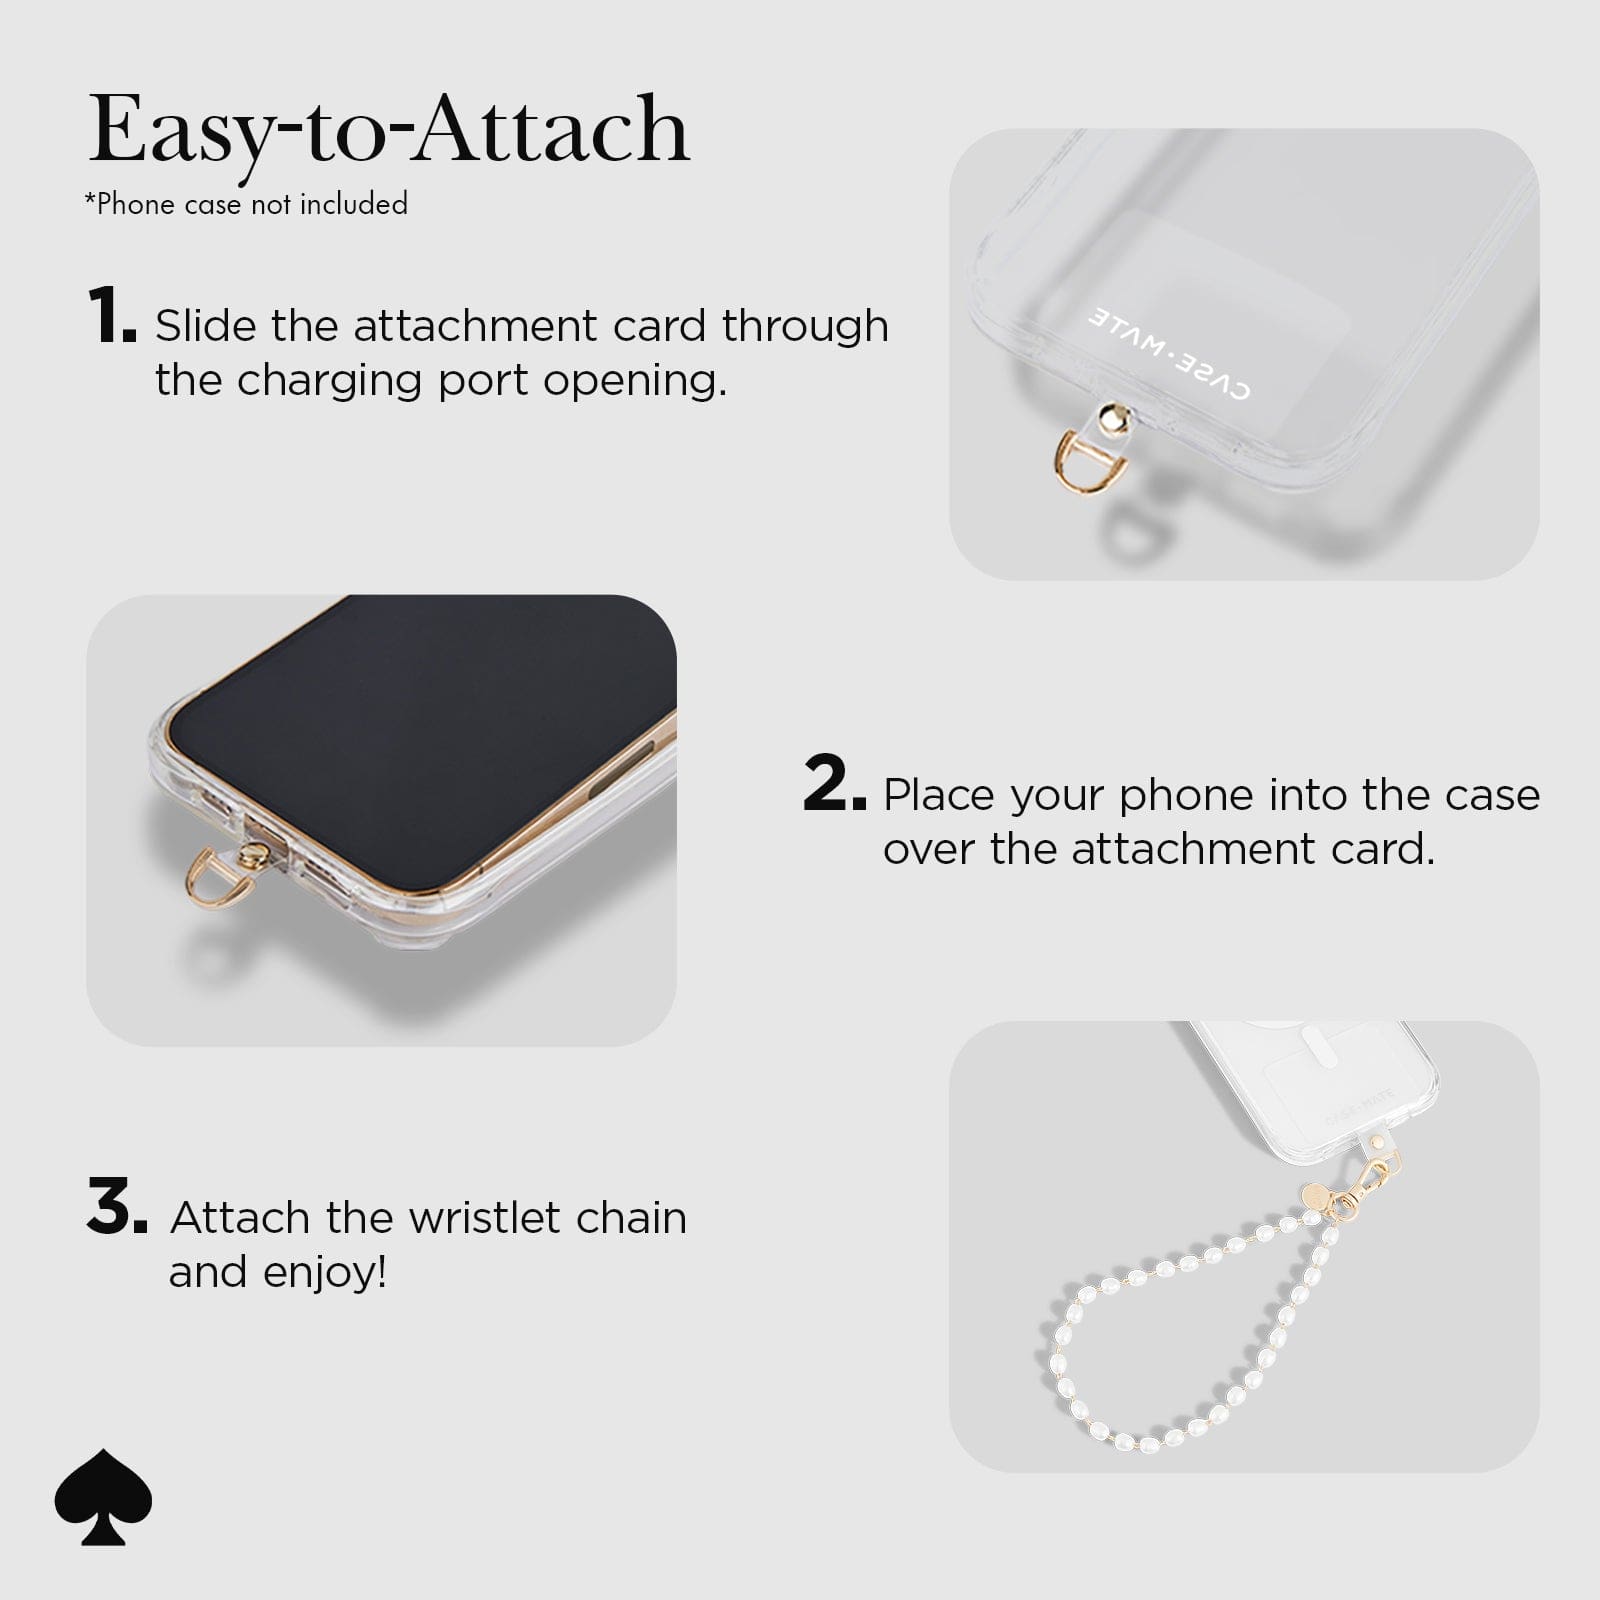 EASY-TO-ATTACH. PHONE CASE NOT INCLUDED. 1. SLIDE THE ATTACHMENT CARD THROUGH THE CHARGING PORT OPENING. 2. PLACE YOUR PHONE INTO THE CASE OVER THE ATTACHMENT CARD. 3. ATTACH THE WRISTLET CHAIN AND ENJOY!